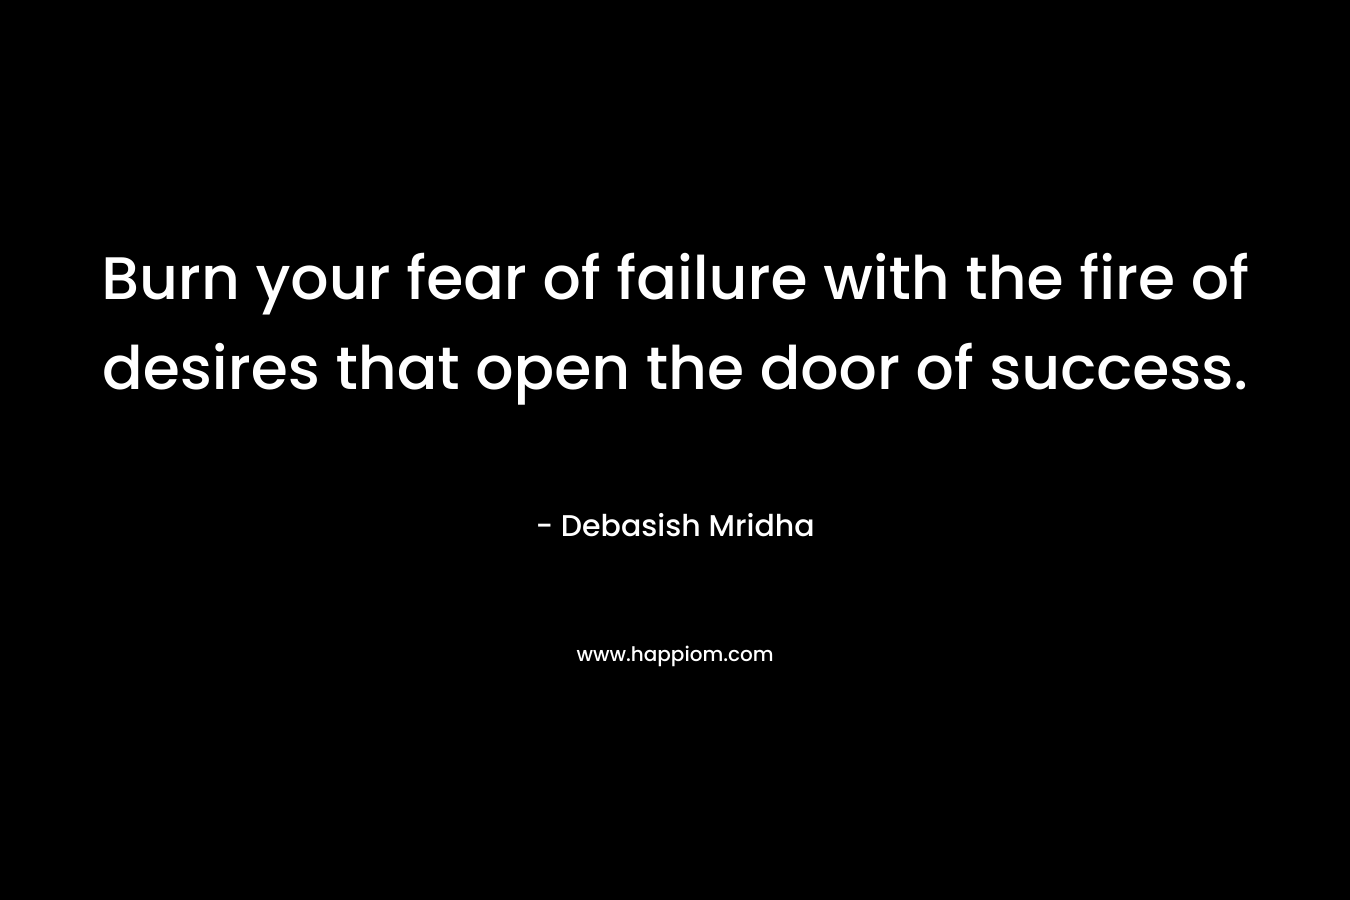 Burn your fear of failure with the fire of desires that open the door of success.